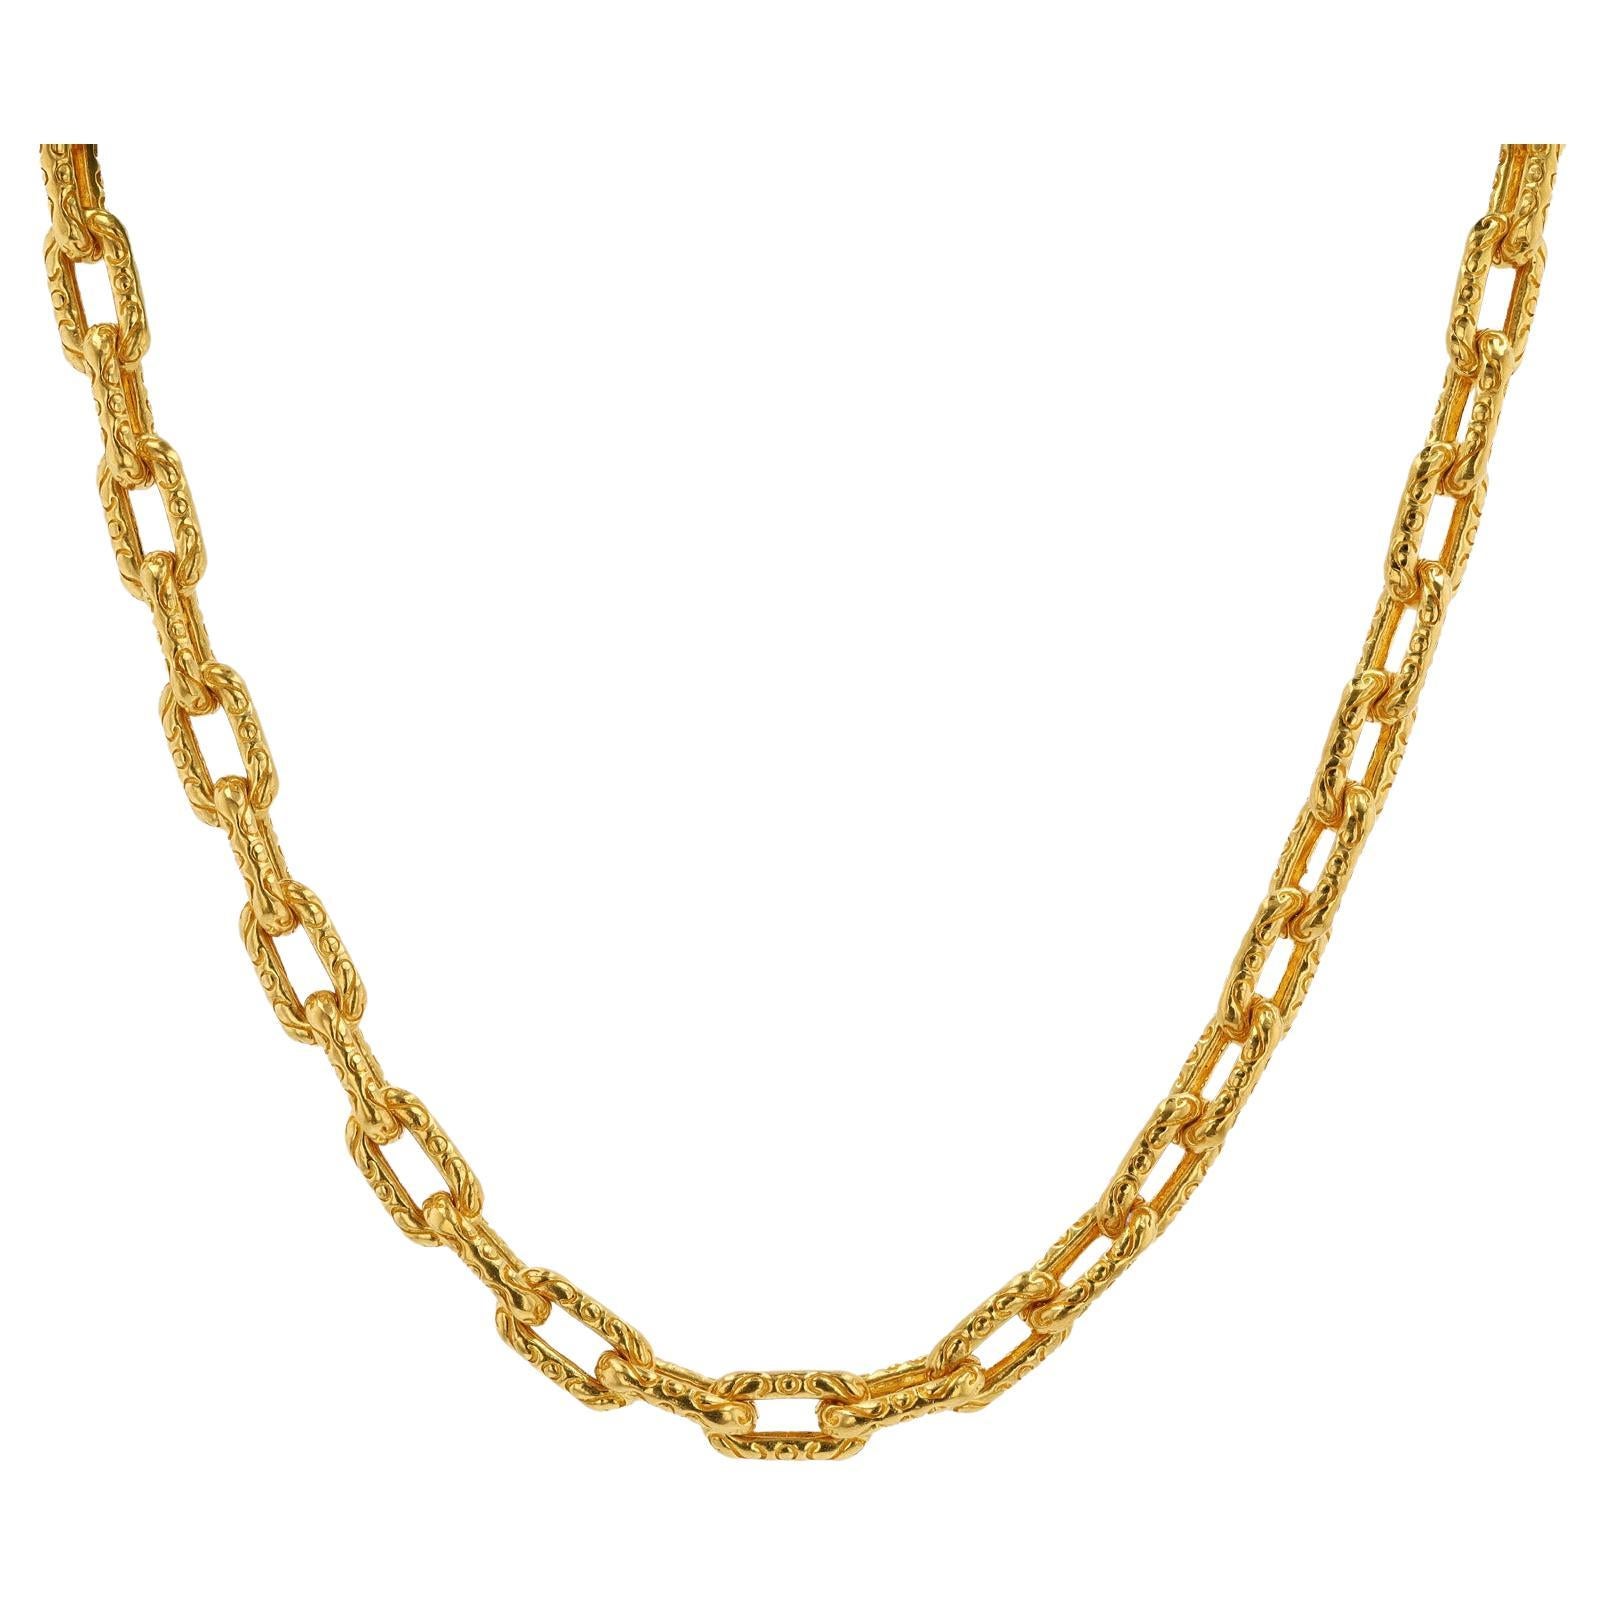 Vintage Heavy 24K Yellow Gold Engraved Chain Link Necklace